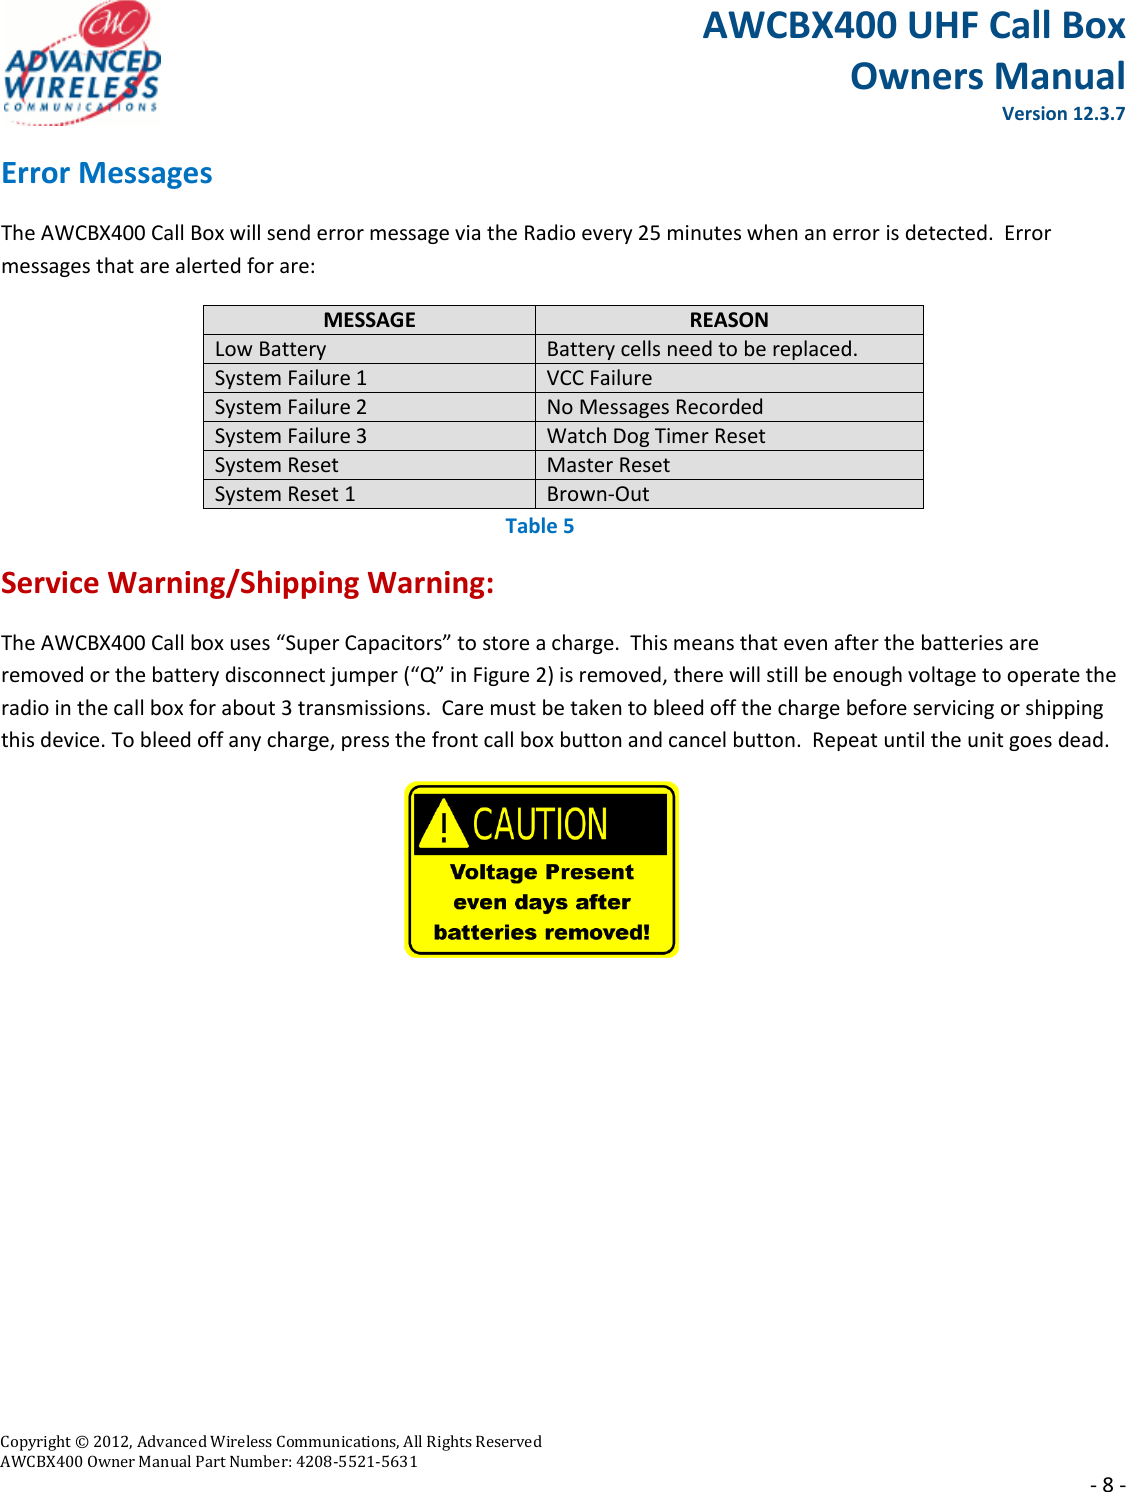 AWCBX400 UHF Call Box Owners Manual  Version 12.3.7   Copyright © 2012, Advanced Wireless Communications, All Rights Reserved  AWCBX400 Owner Manual Part Number: 4208-5521-5631     - 8 - Error Messages The AWCBX400 Call Box will send error message via the Radio every 25 minutes when an error is detected.  Error messages that are alerted for are: MESSAGE REASON Low Battery Battery cells need to be replaced. System Failure 1 VCC Failure System Failure 2 No Messages Recorded System Failure 3 Watch Dog Timer Reset System Reset Master Reset System Reset 1 Brown-Out  Service Warning/Shipping Warning: The AWCBX400 Call box uses “Super Capacitors” to store a charge.  This means that even after the batteries are removed or the battery disconnect jumper (“Q” in Figure 2) is removed, there will still be enough voltage to operate the radio in the call box for about 3 transmissions.  Care must be taken to bleed off the charge before servicing or shipping this device. To bleed off any charge, press the front call box button and cancel button.  Repeat until the unit goes dead.             Table 5 